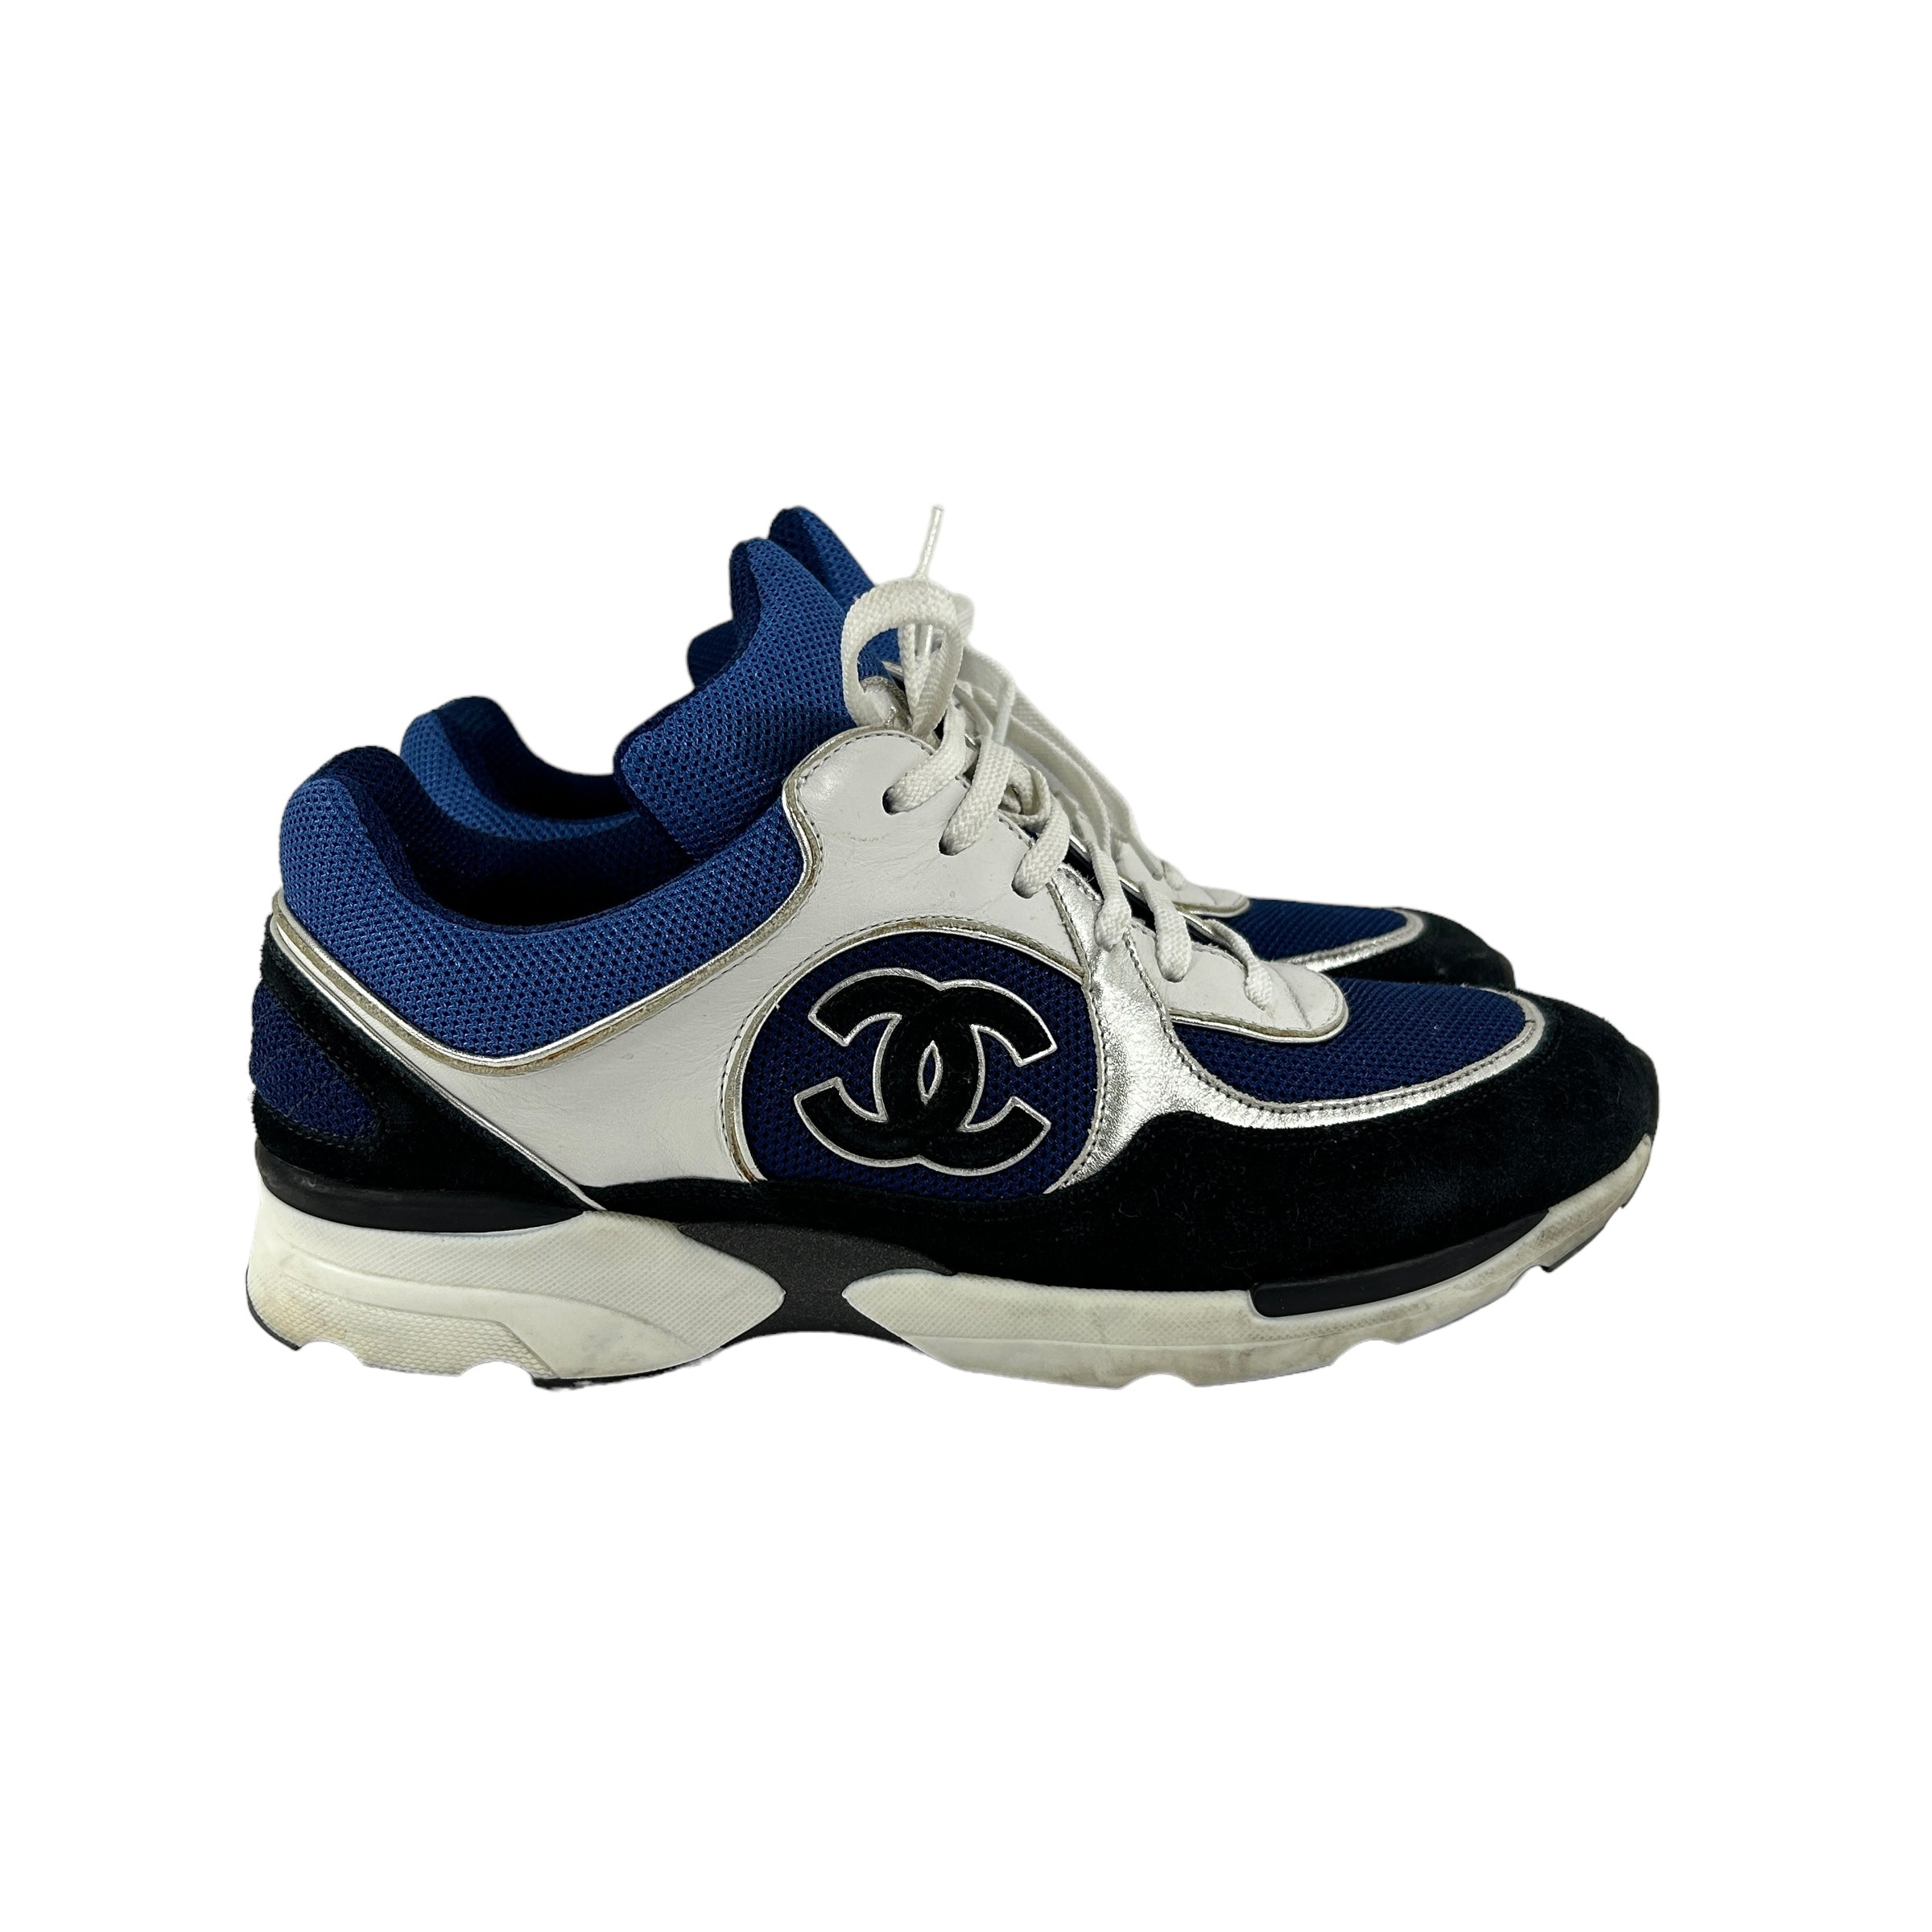 CHANEL CC Blue/Black Leather/Suede/Mesh Sneakers